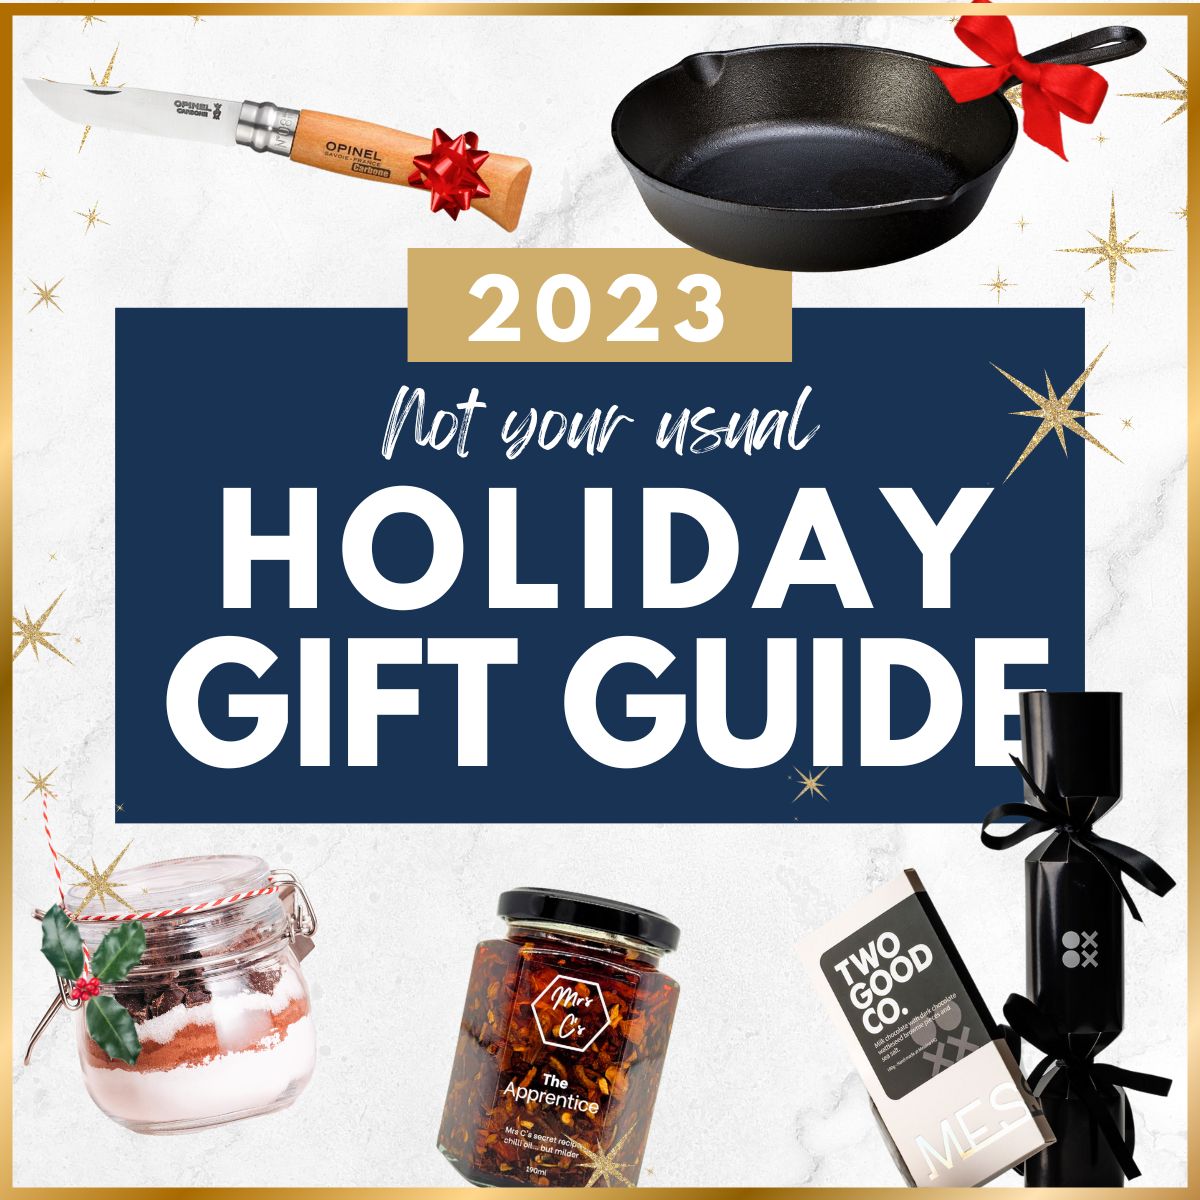 9 Iconic Kitchenware Designs to Give this Holiday Season